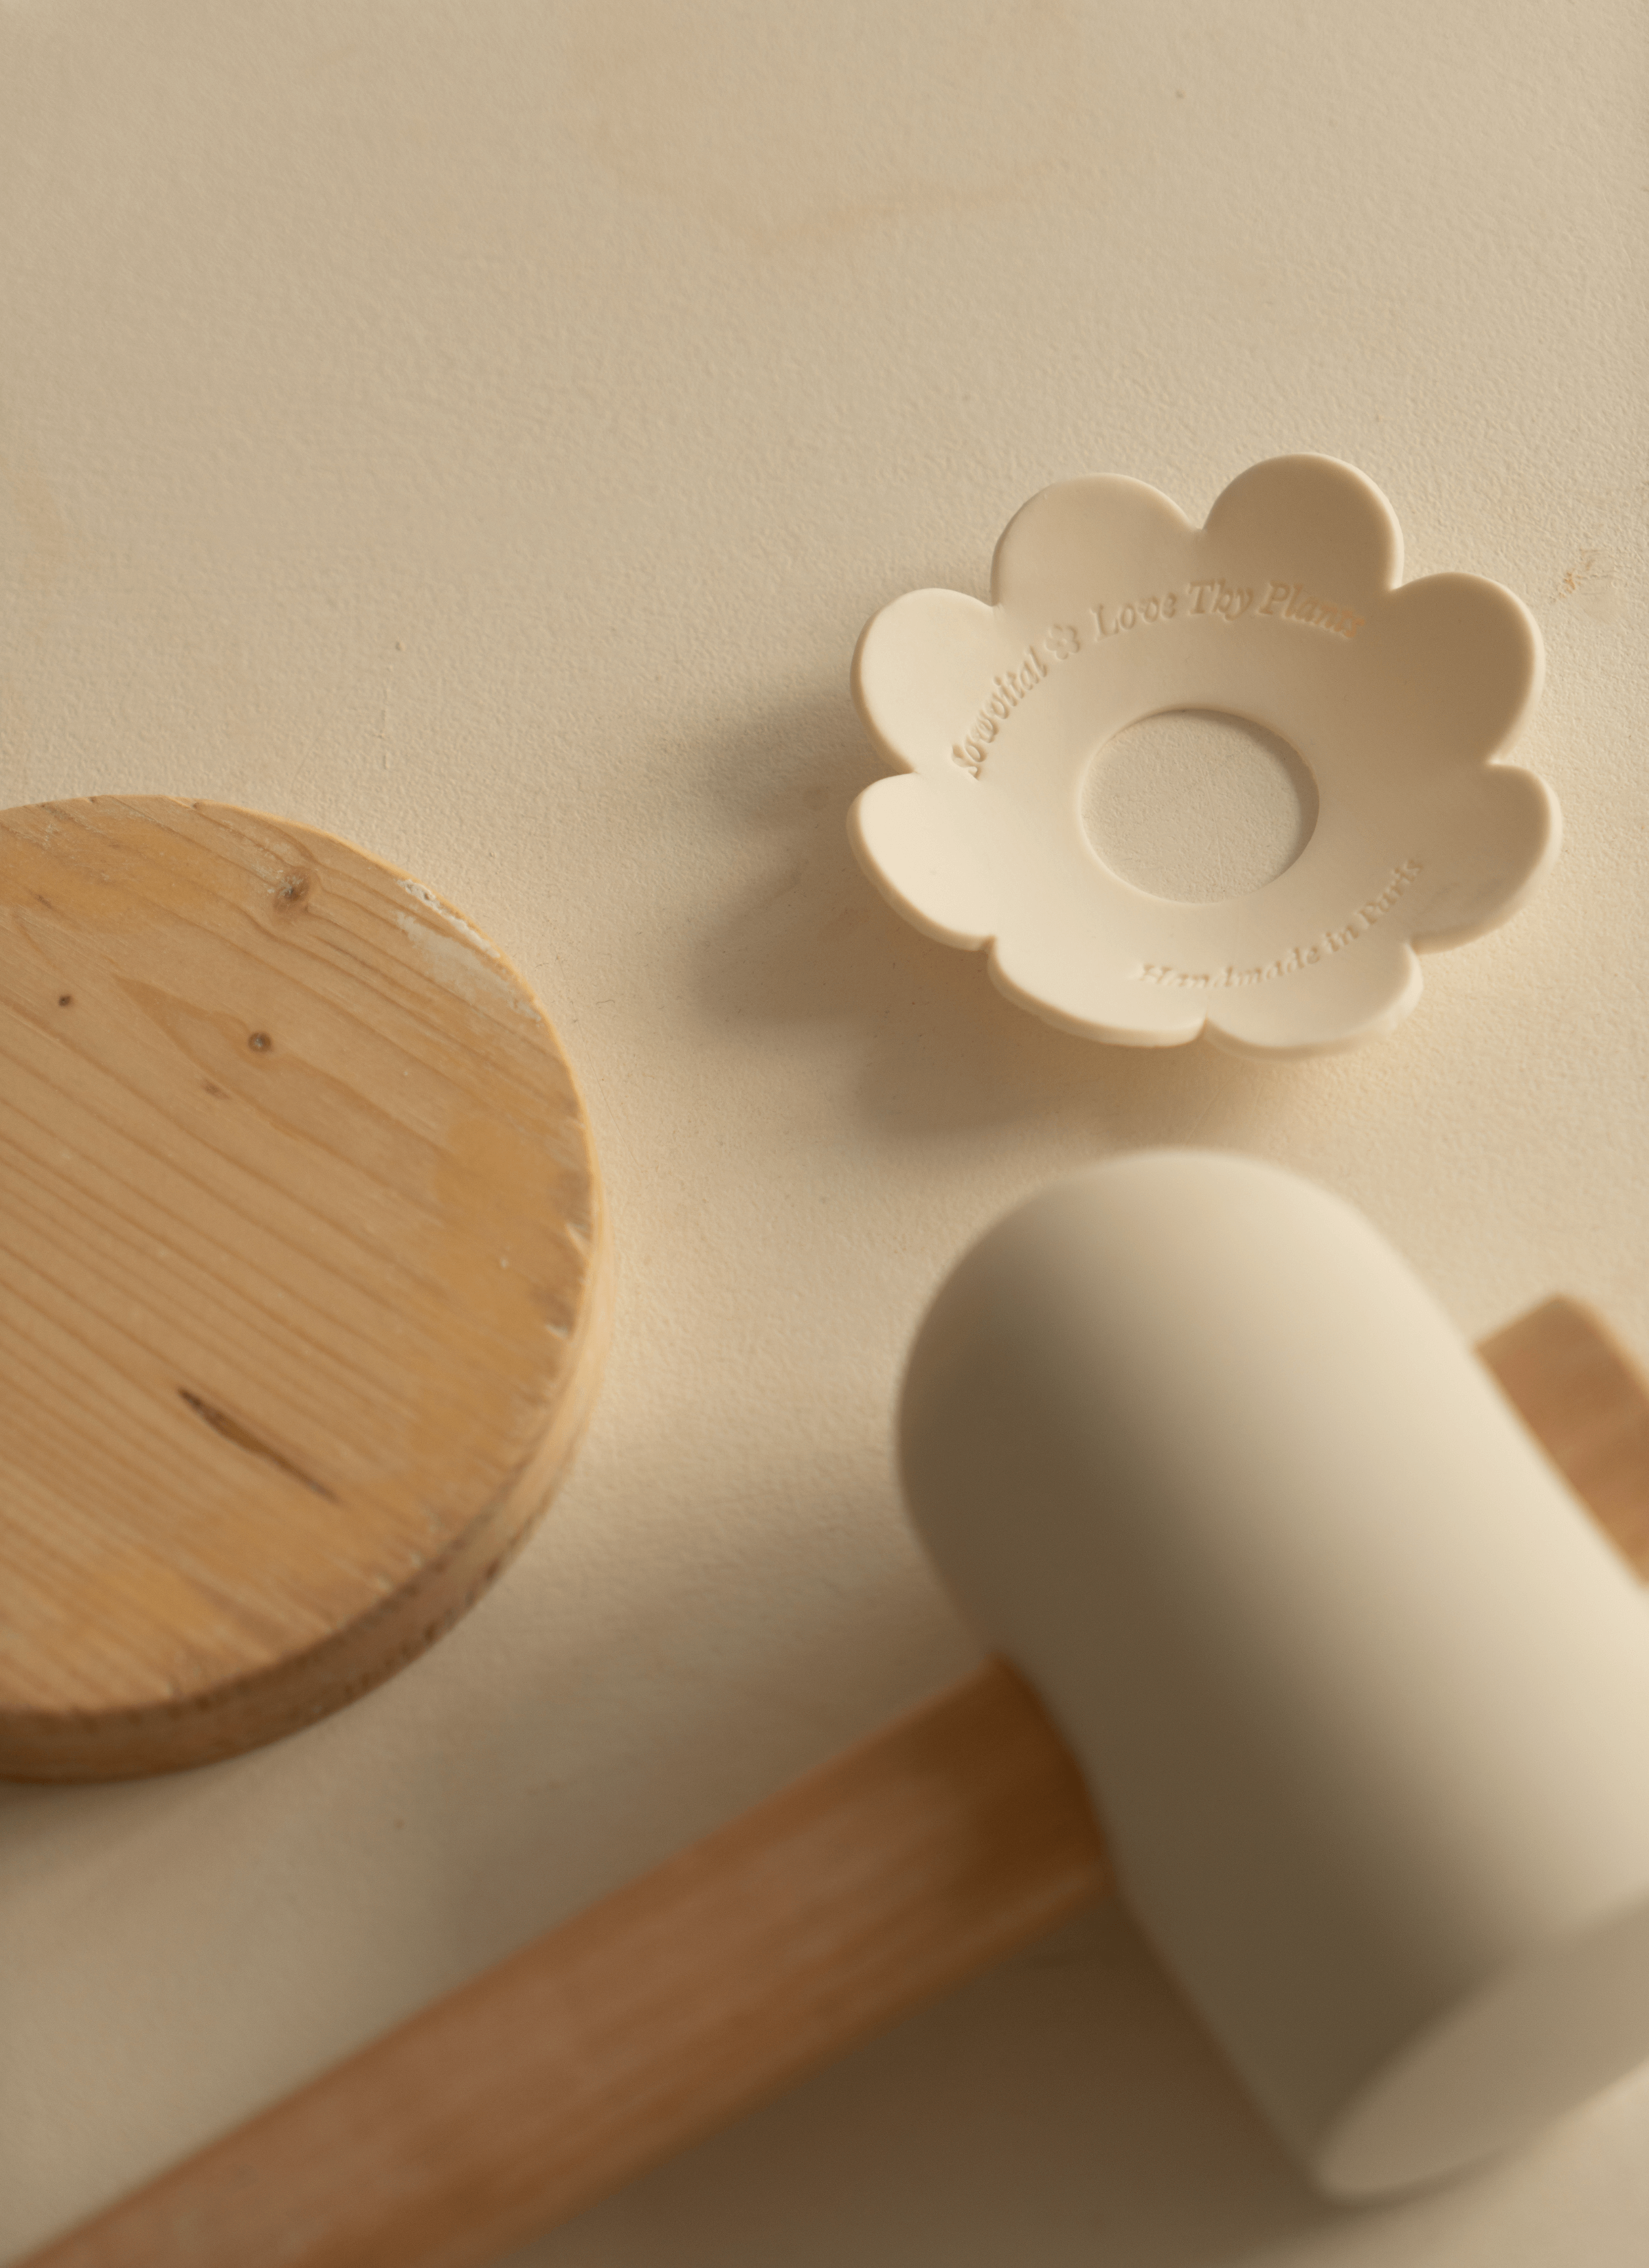 On the table, three distinct ceramic tools/gadgets are arranged: a hammer, a round wooden piece, and a germination disc adorned with Sowvital's label. Each tool serves a specific purpose in the ceramic-making process, from shaping to detailing.